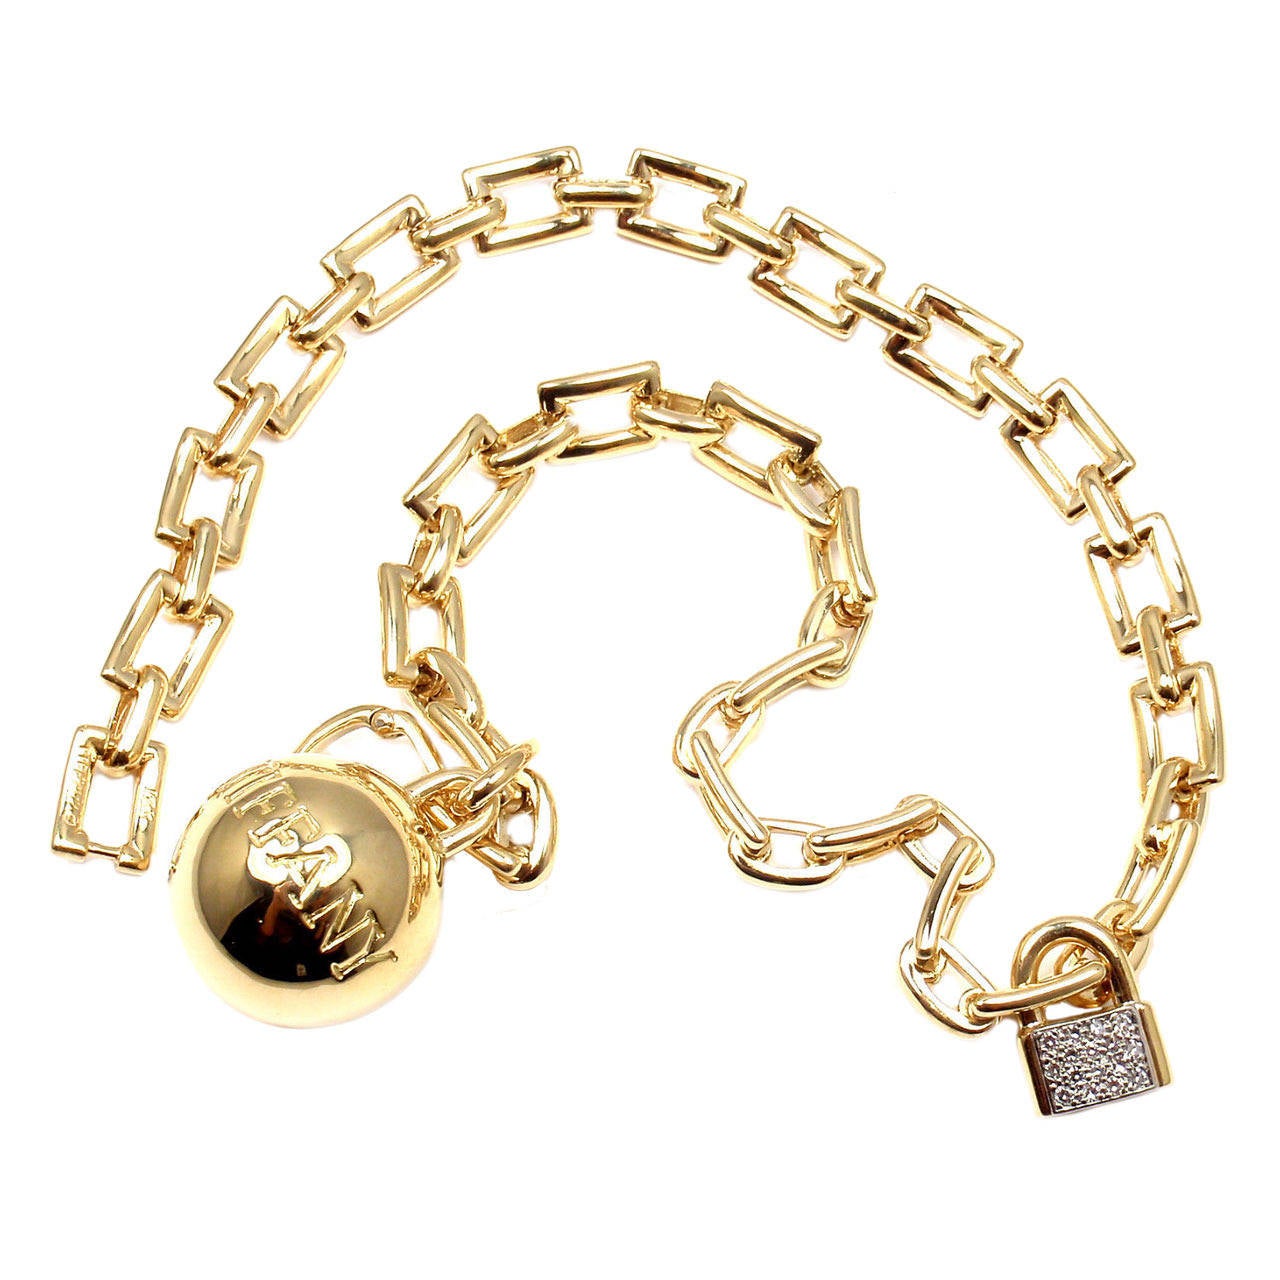 Tiffany & Co. Diamond Ball and Chain Yellow Gold Link Bracelet